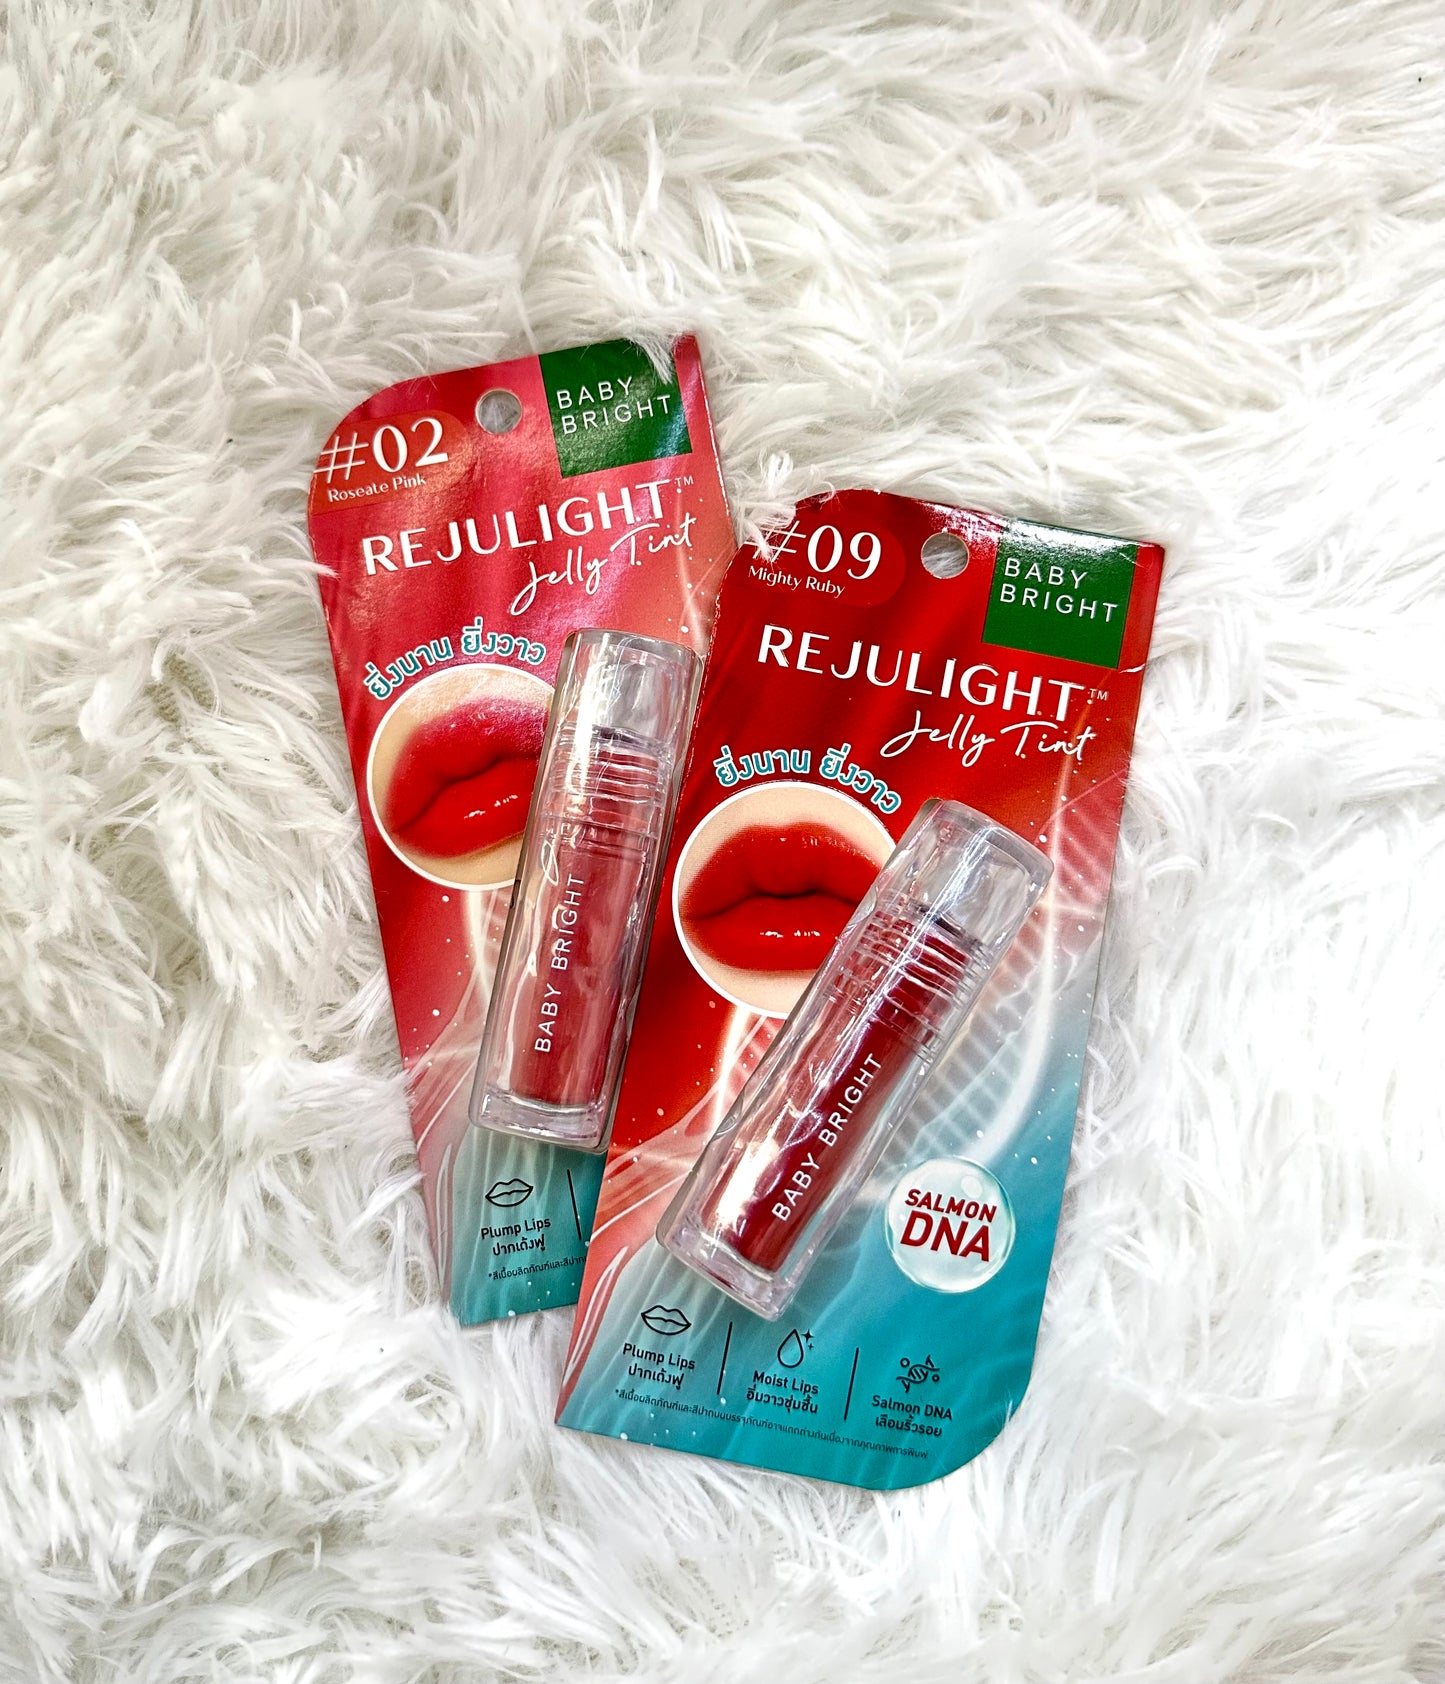 [Promotion] Baby Bright - Rejulight Jelly Tint